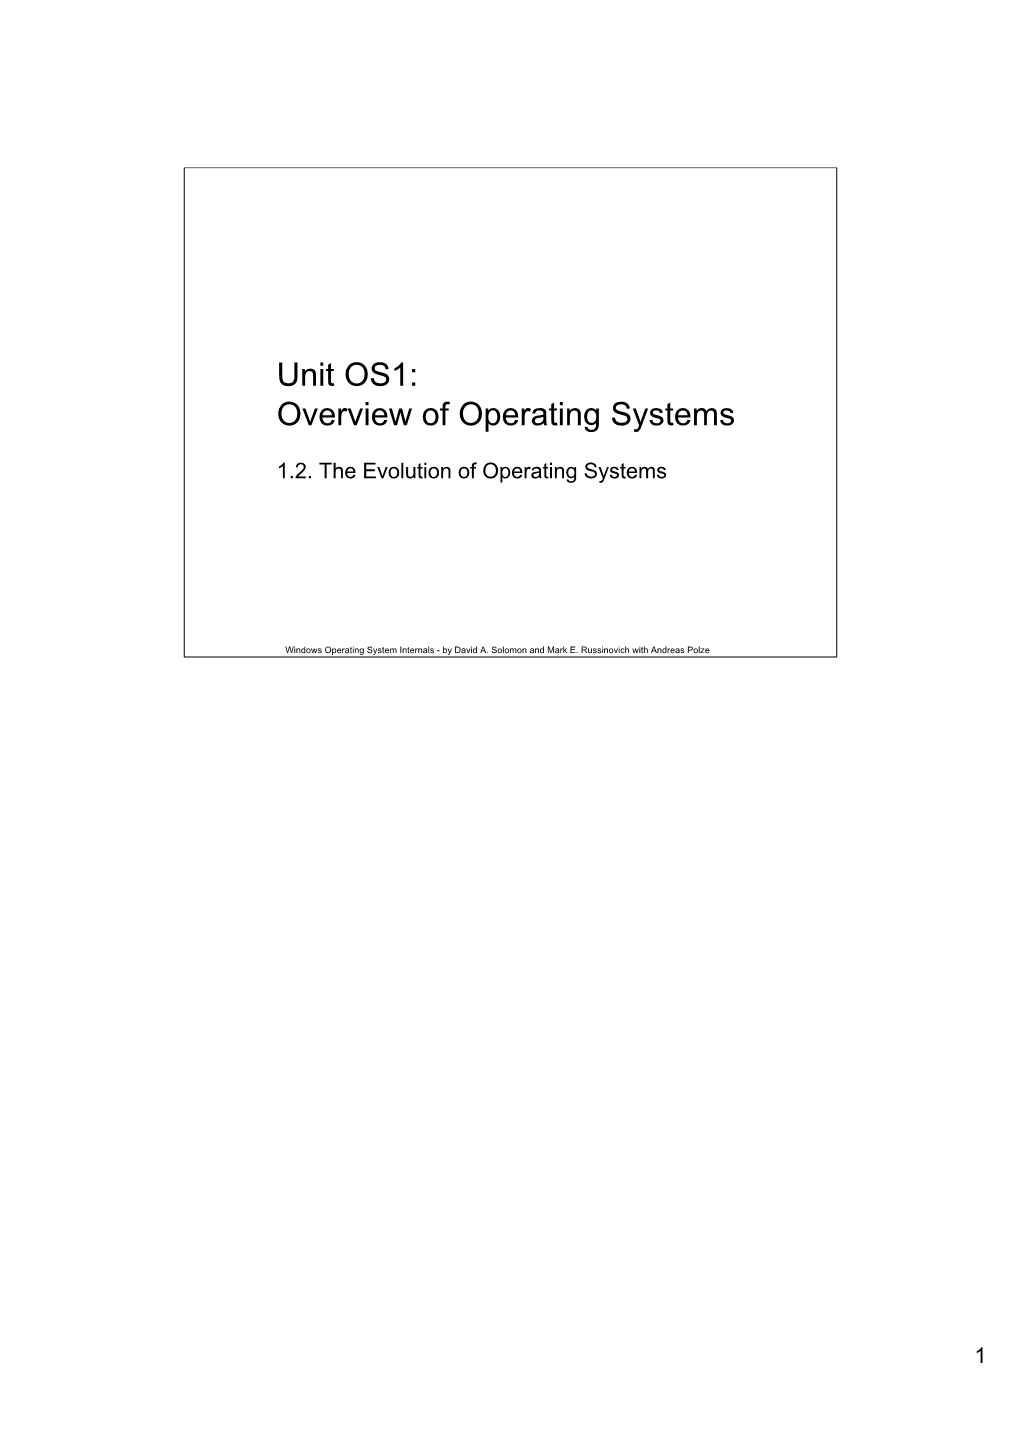 Unit OS1: Overview of Operating Systems